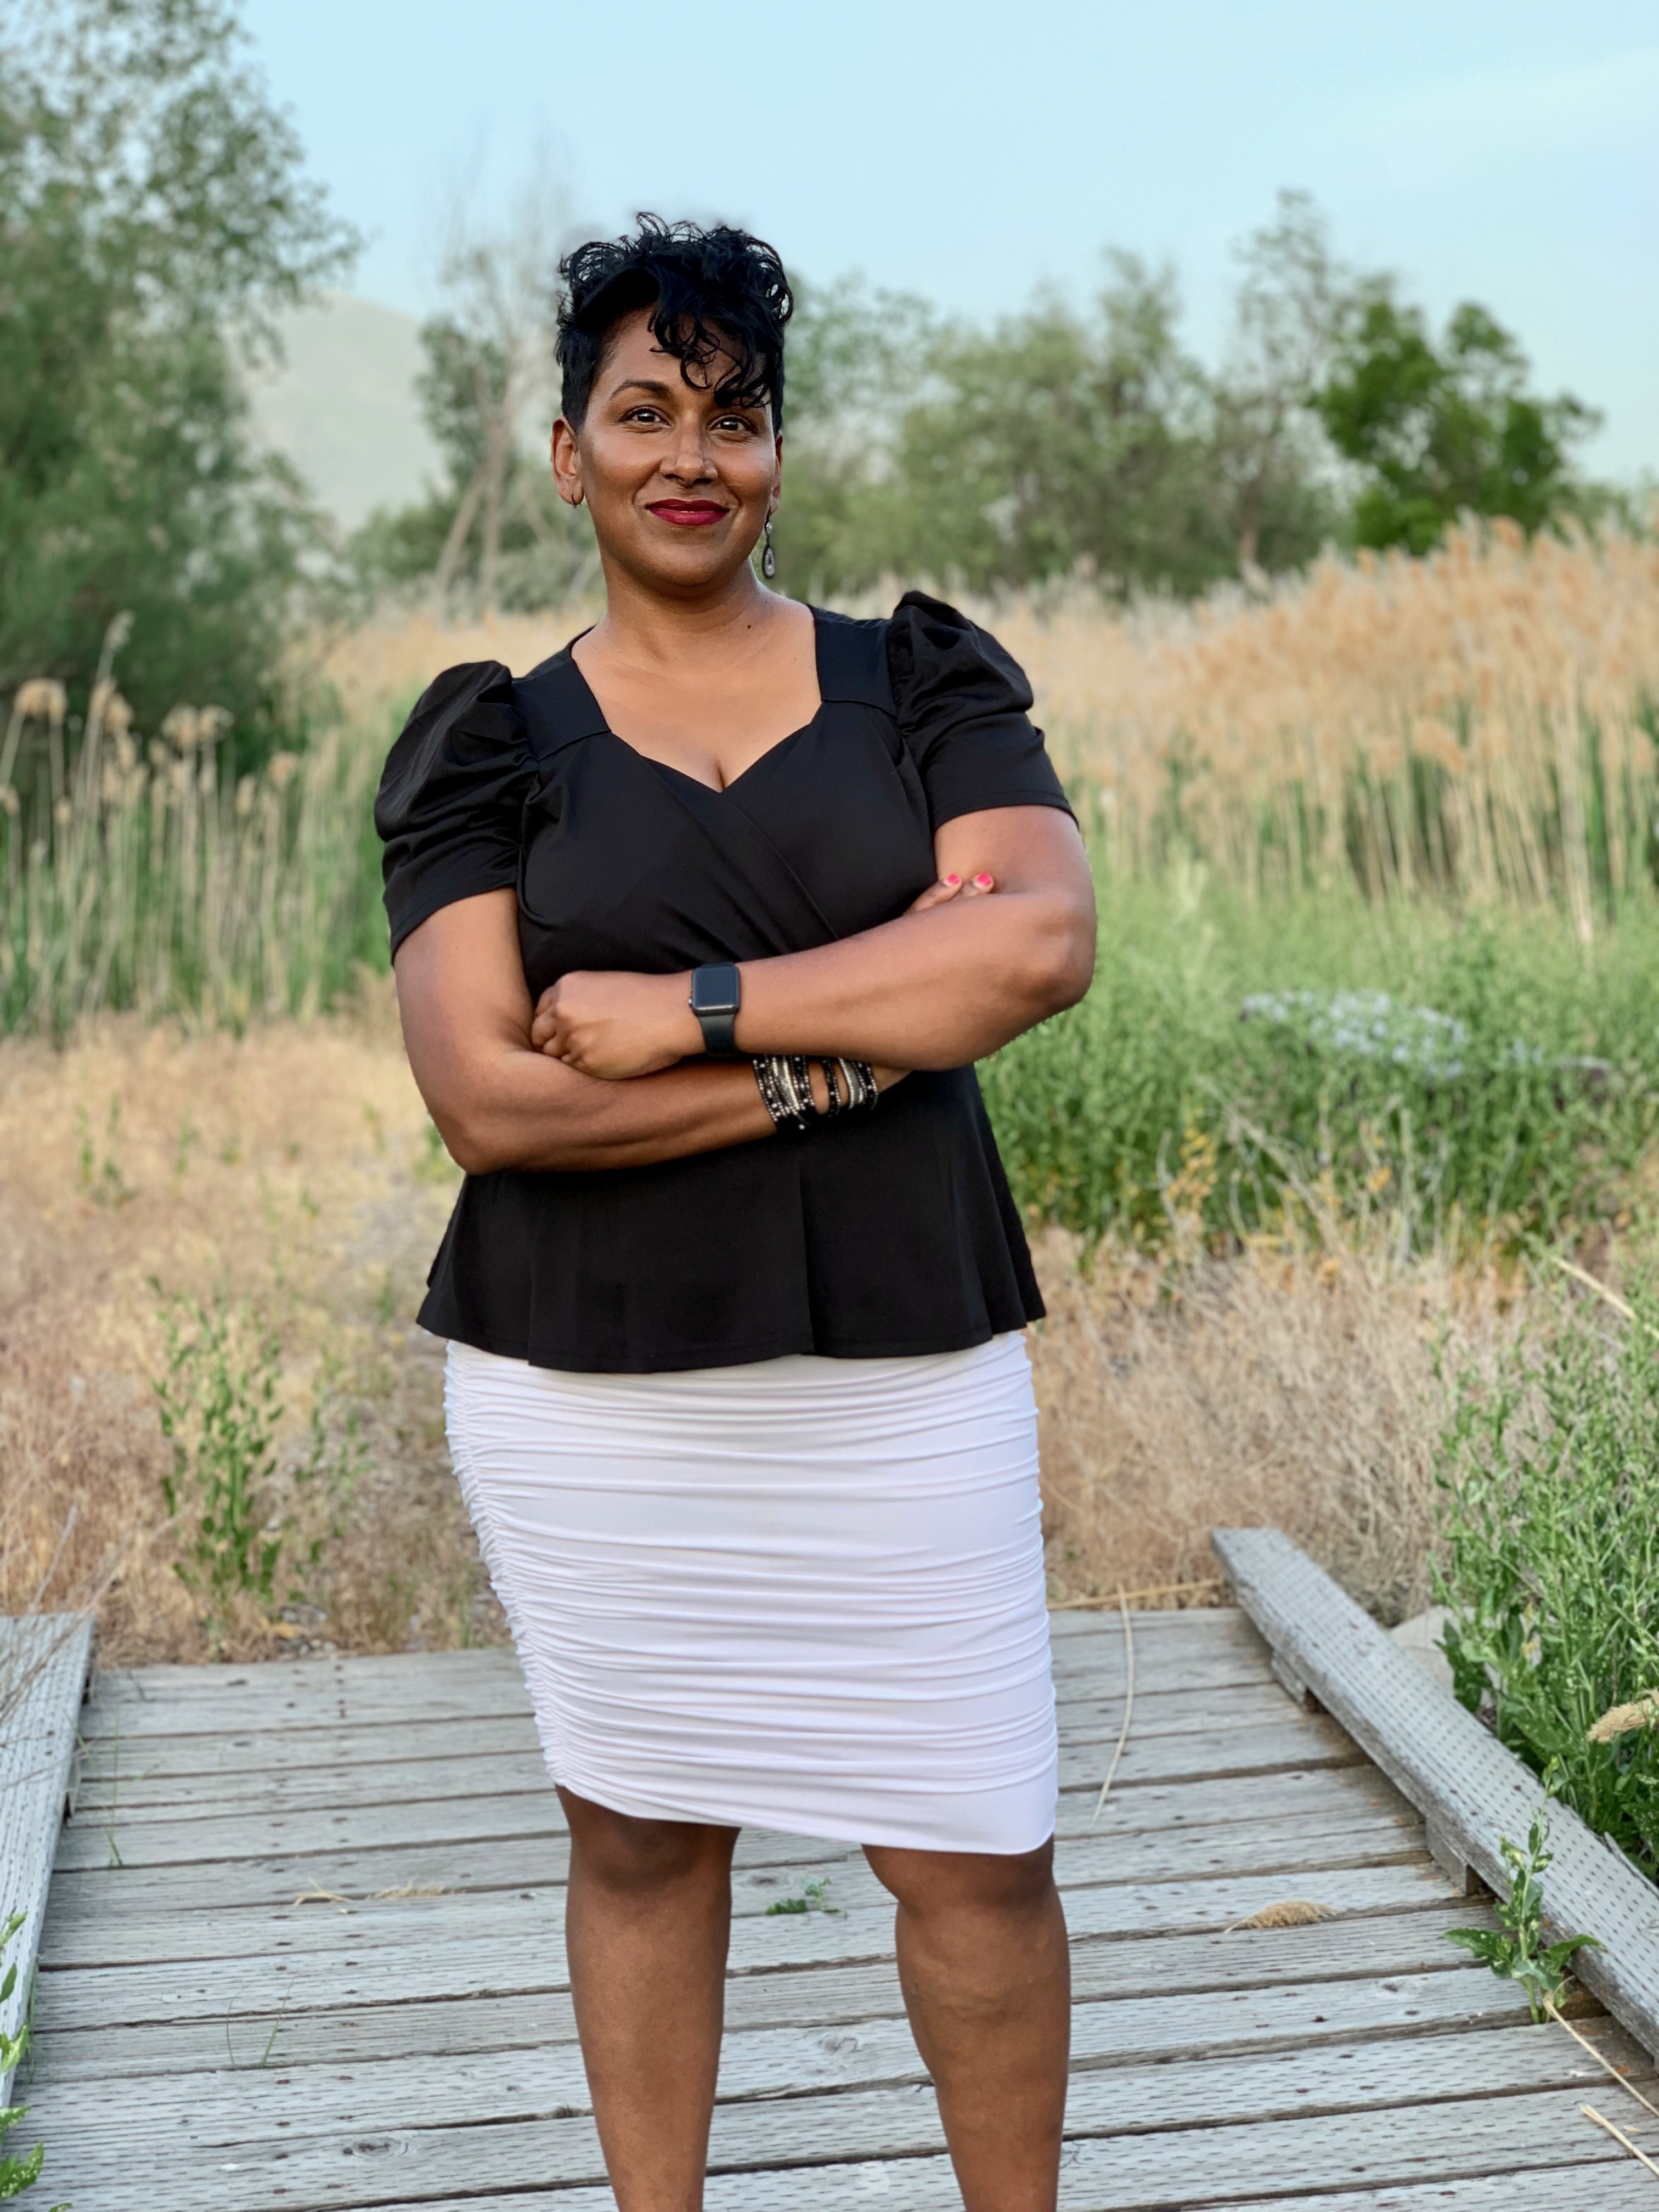 photo of Leatha, a woman of South Asian descent, with brown skin and short black curly hair, folding her arms and looking at the camera. She is wearing a black shirt and white skirt, and she is standing in a field.